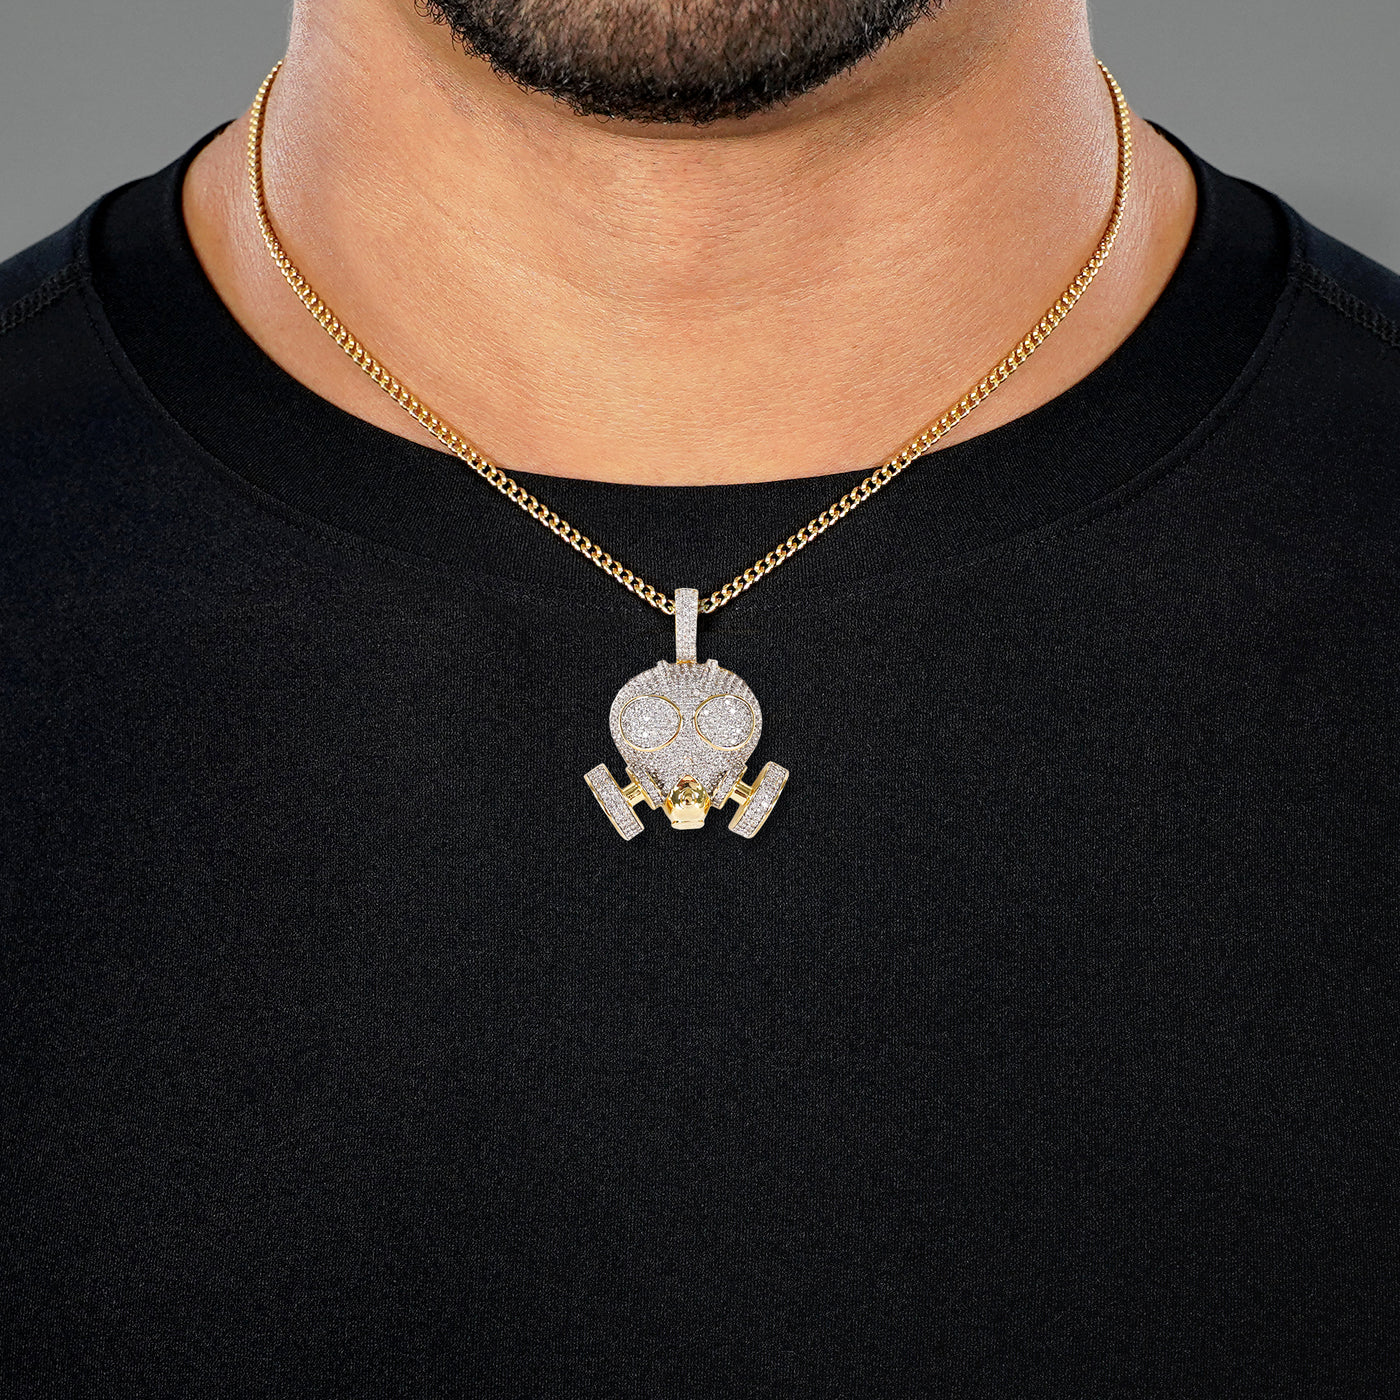 Gas Mask 1½" Pendant with Chain Necklace - Gold Plated Stainless Steel